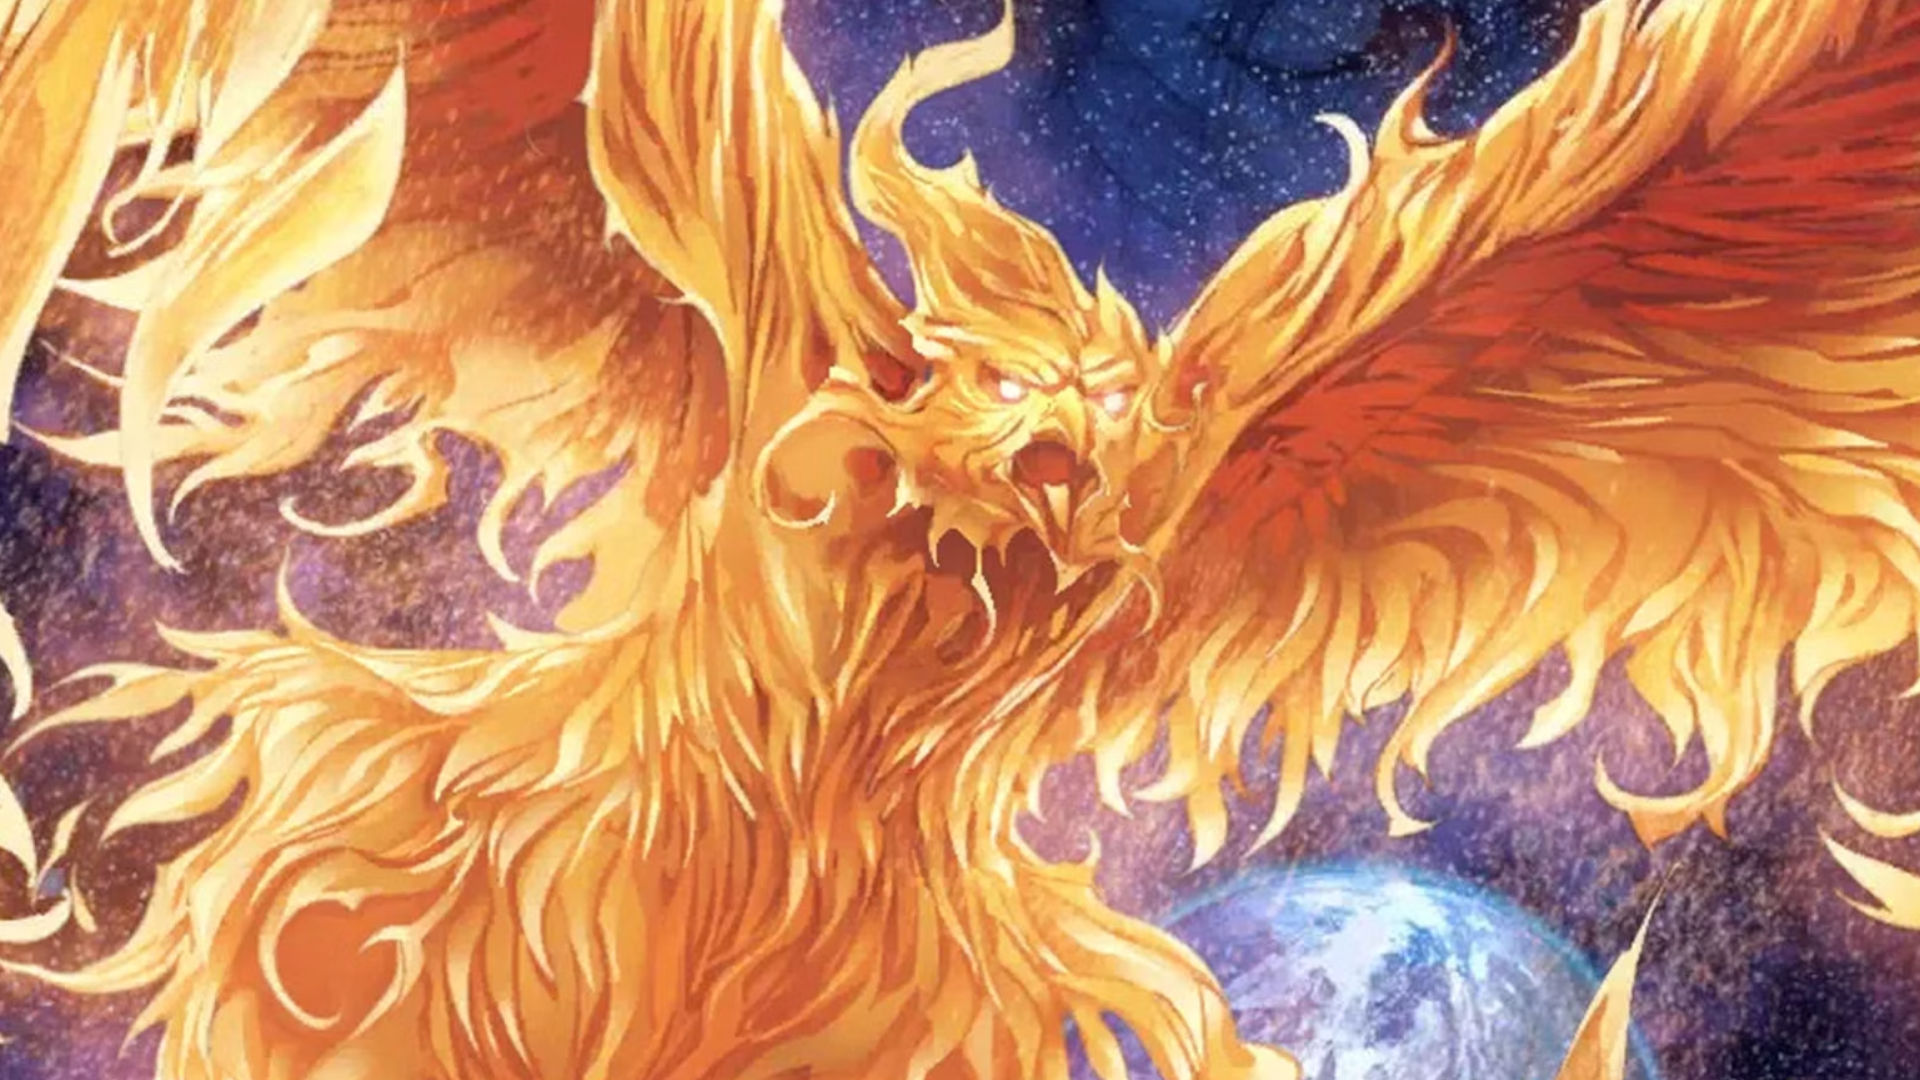 The Phoenix Comes to Marvel Snap with This Month's Season Pass